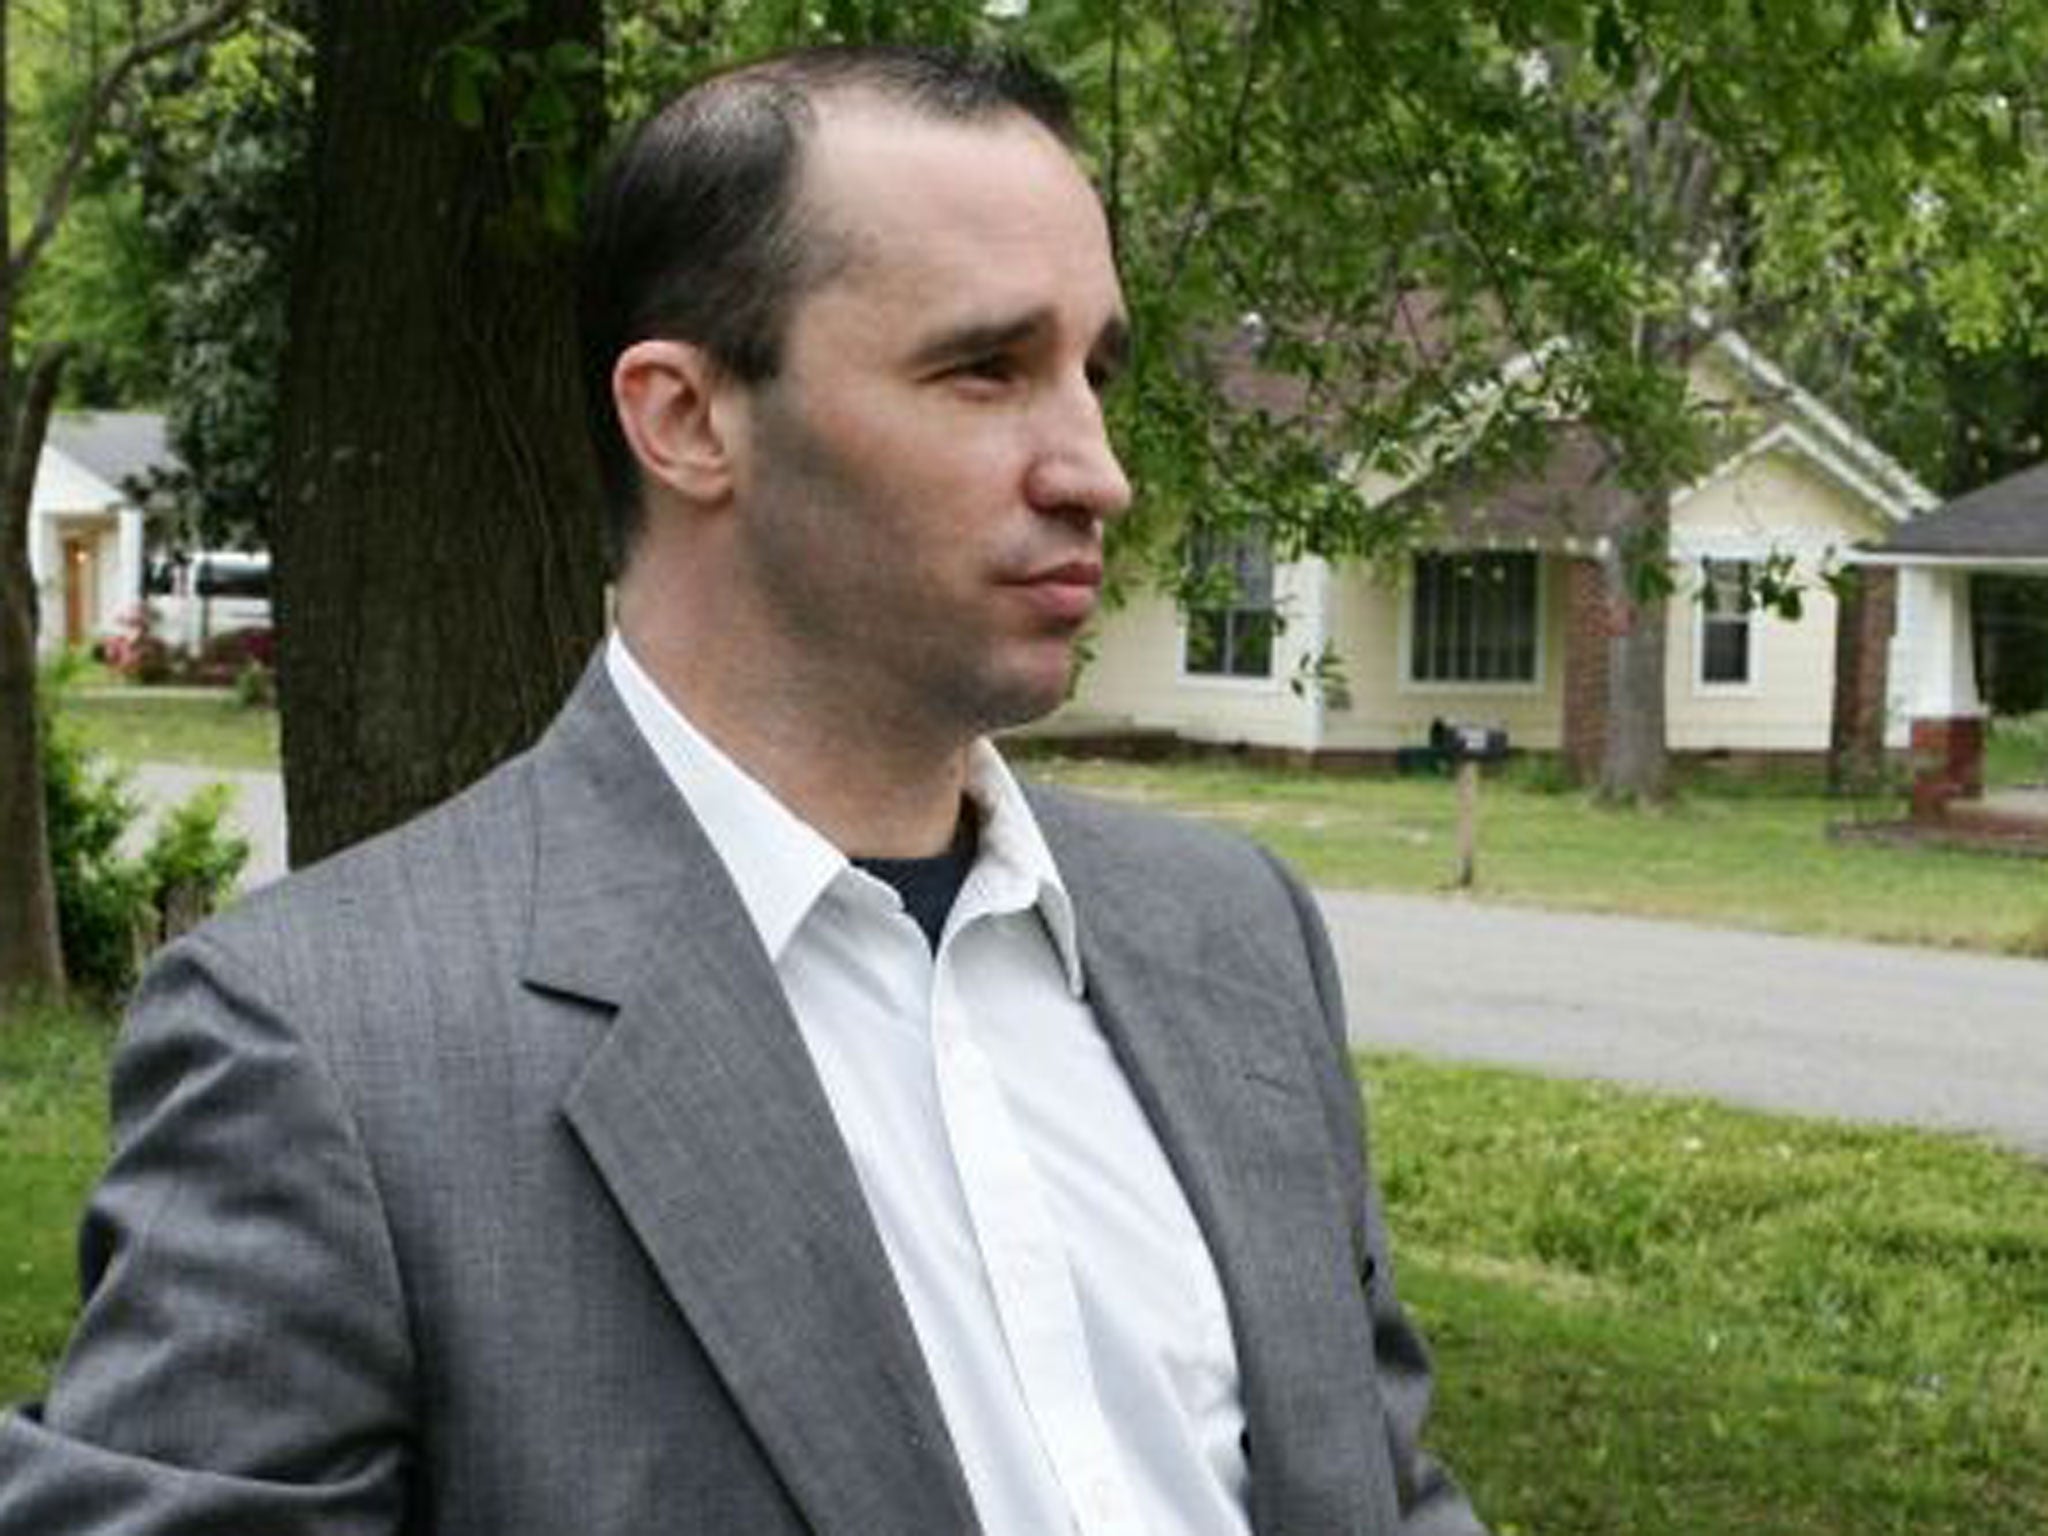 Everett Dutschke has been arrested over the poison letters sent to Barack Obama and two other politicians